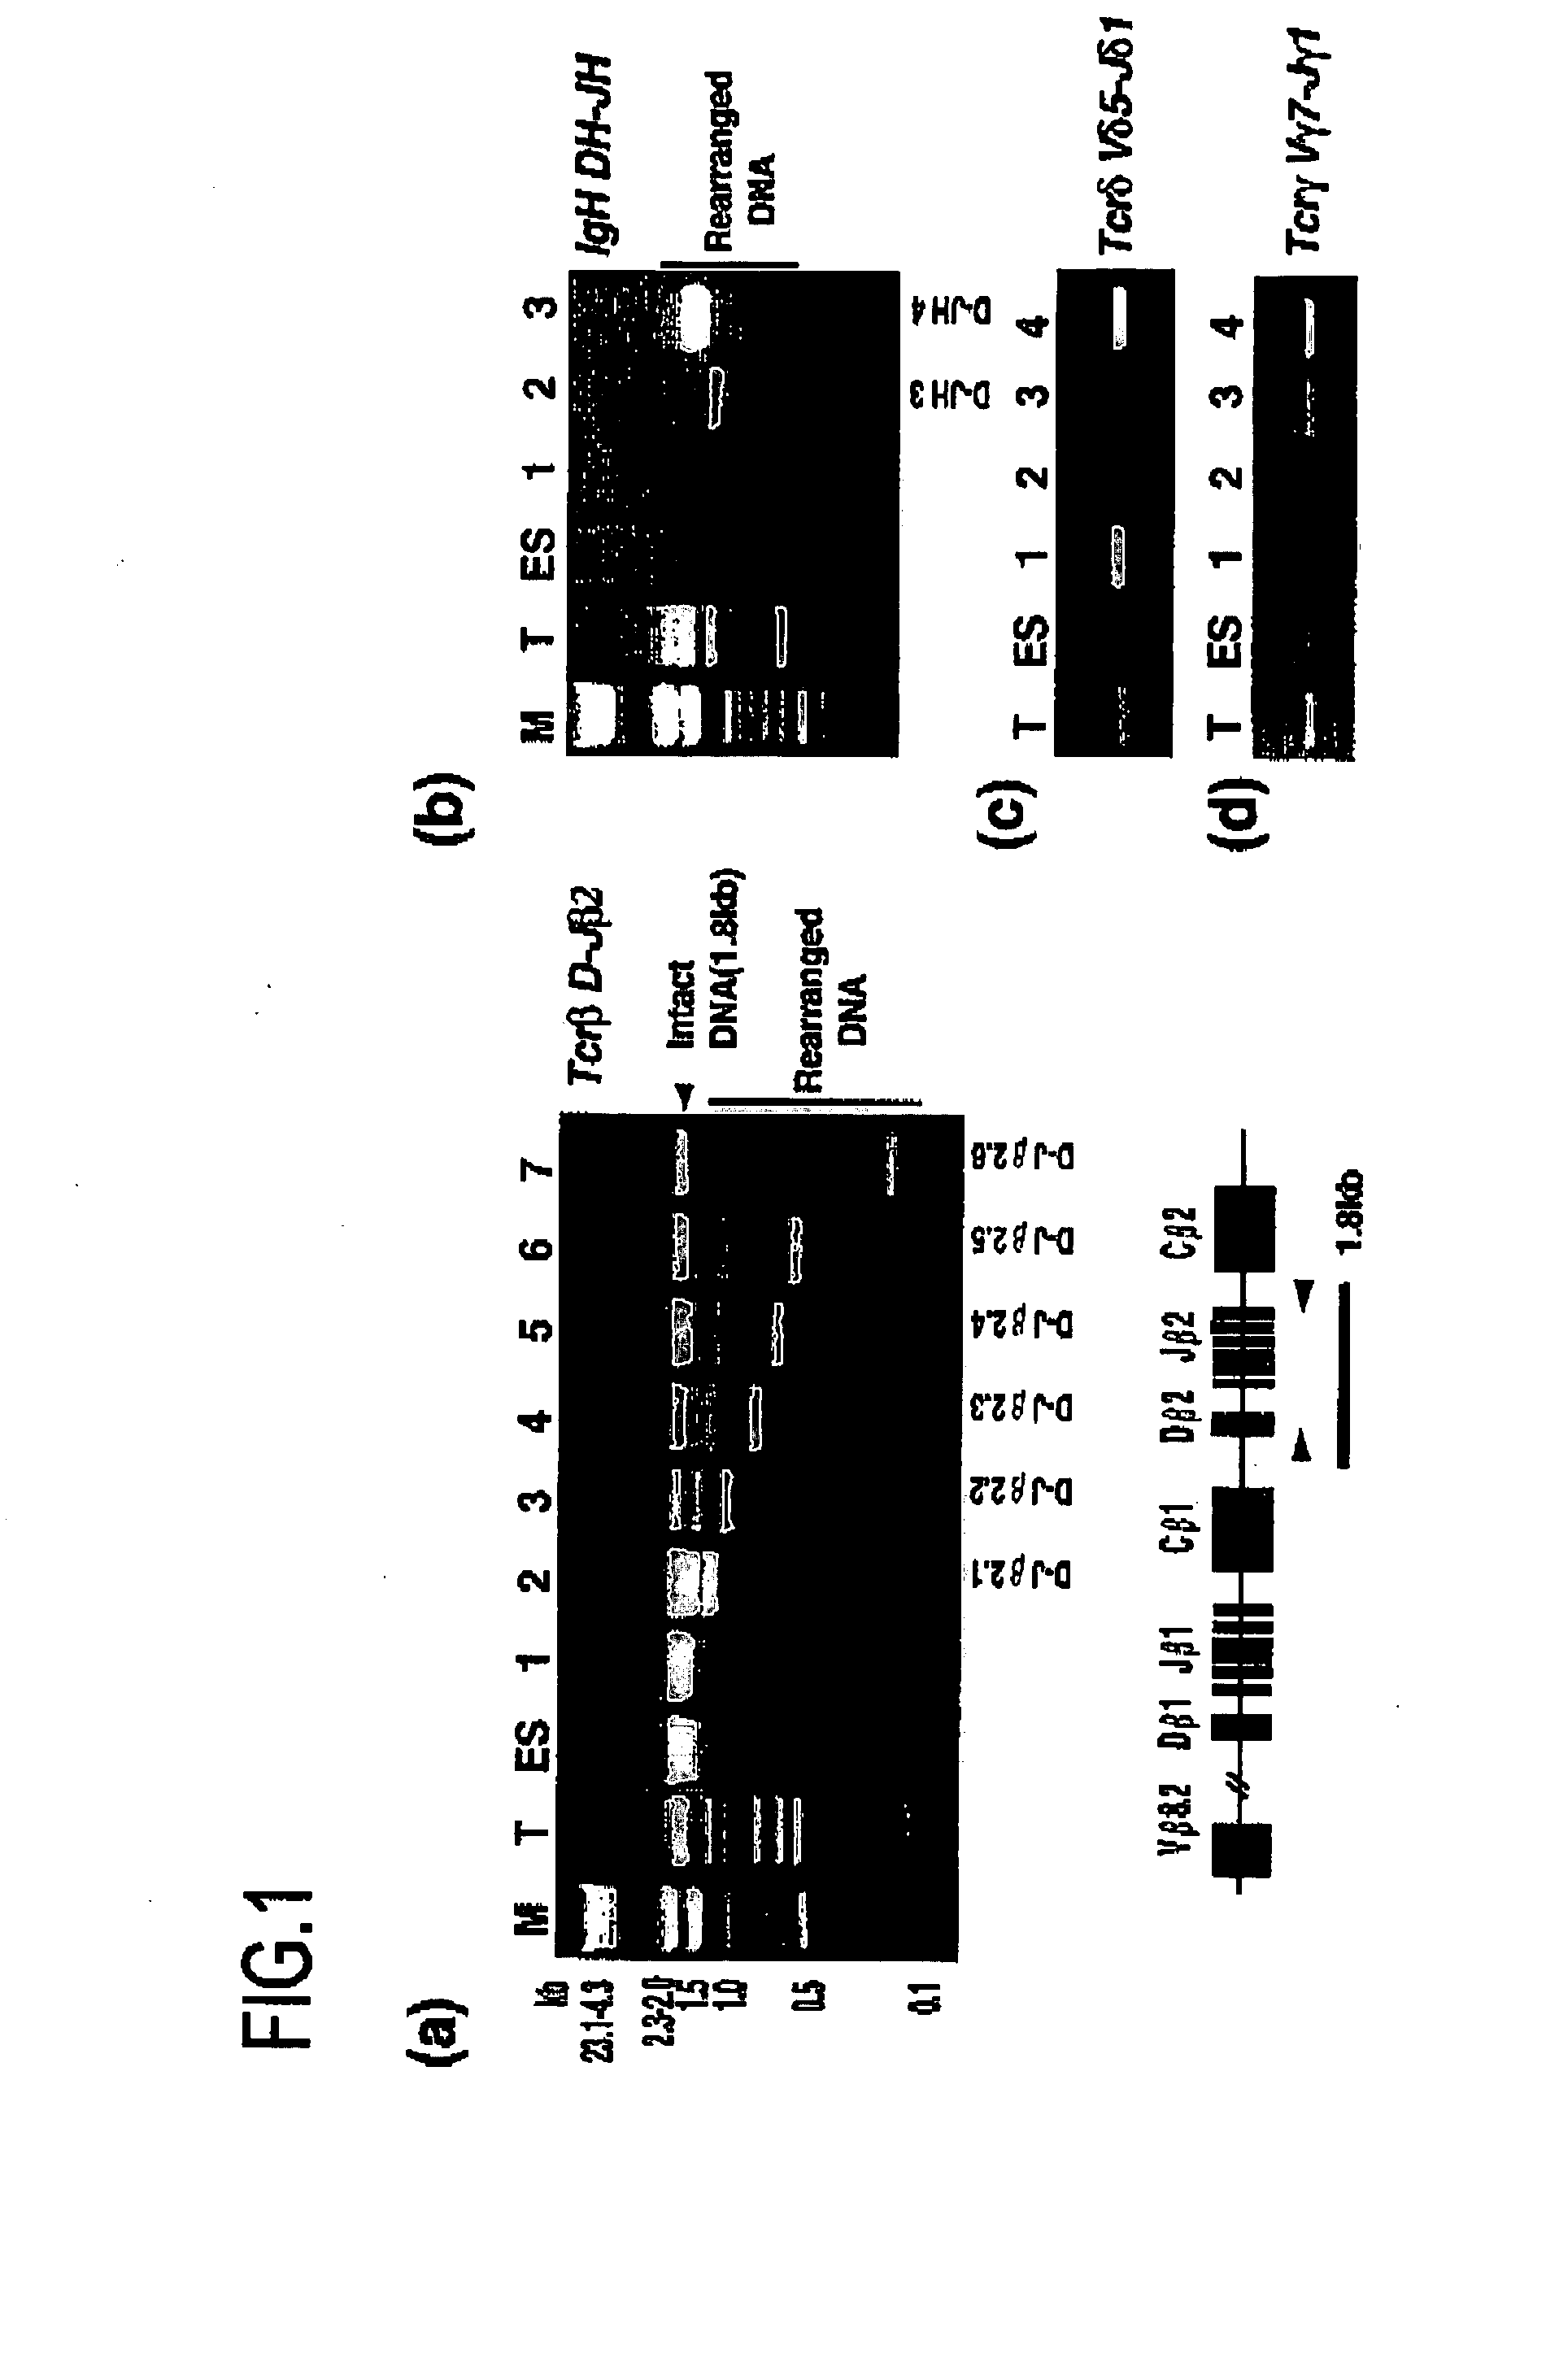 Tailor-made multifunctional stem cells and utilization thereof